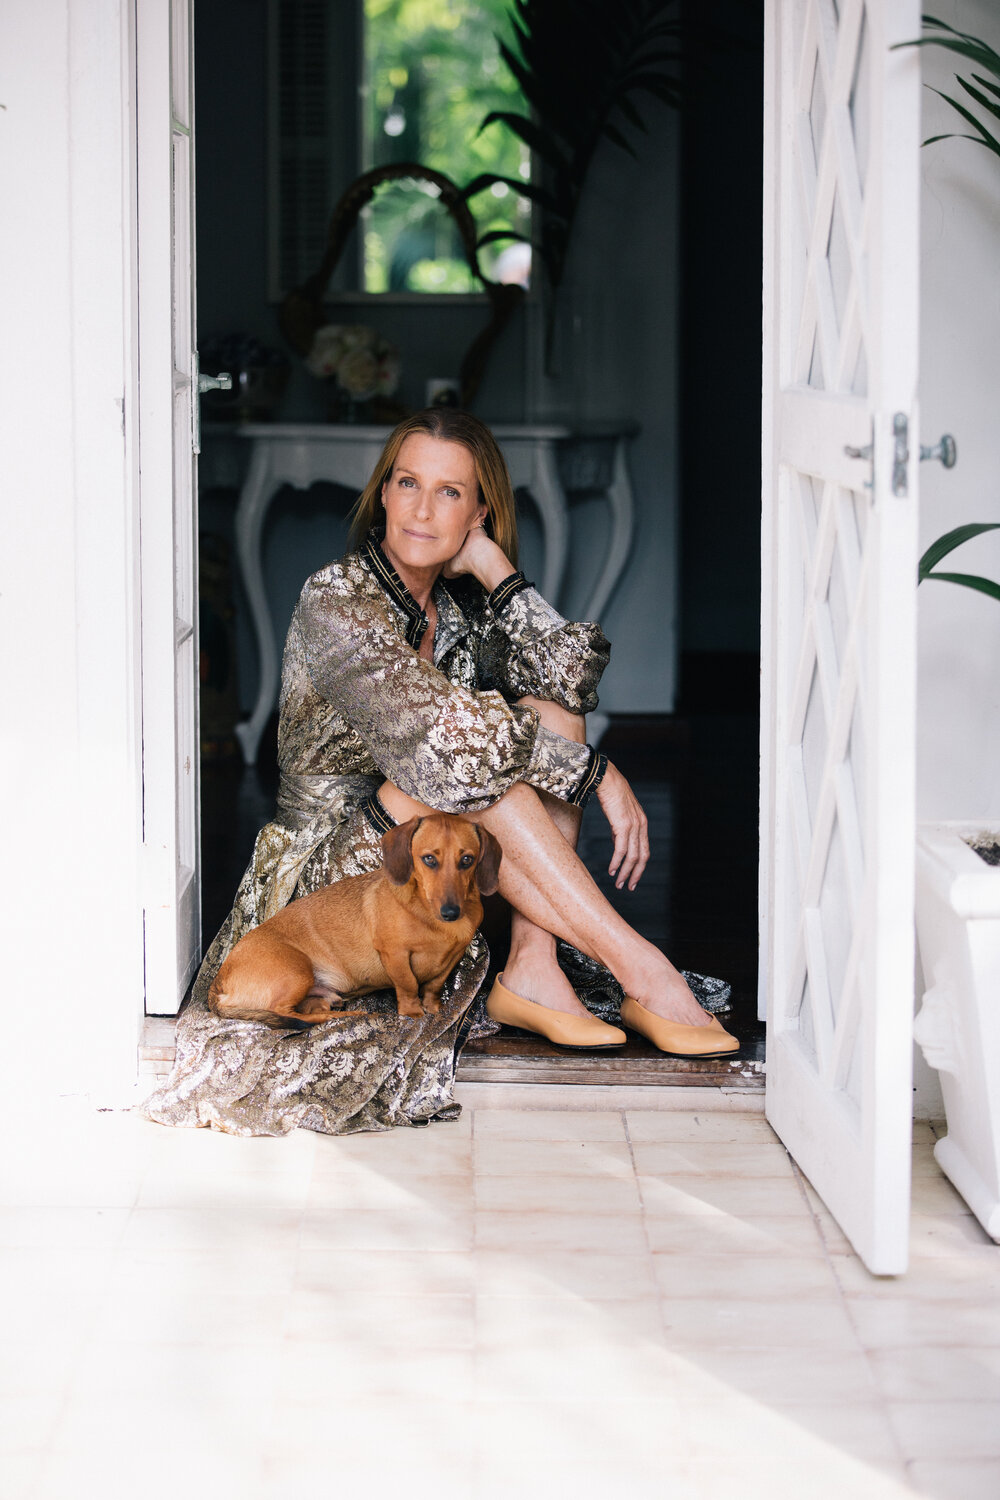 India Hicks is on the island this week to participate in a panel discussion at the NHA’s Nantucket by Design fundraiser.